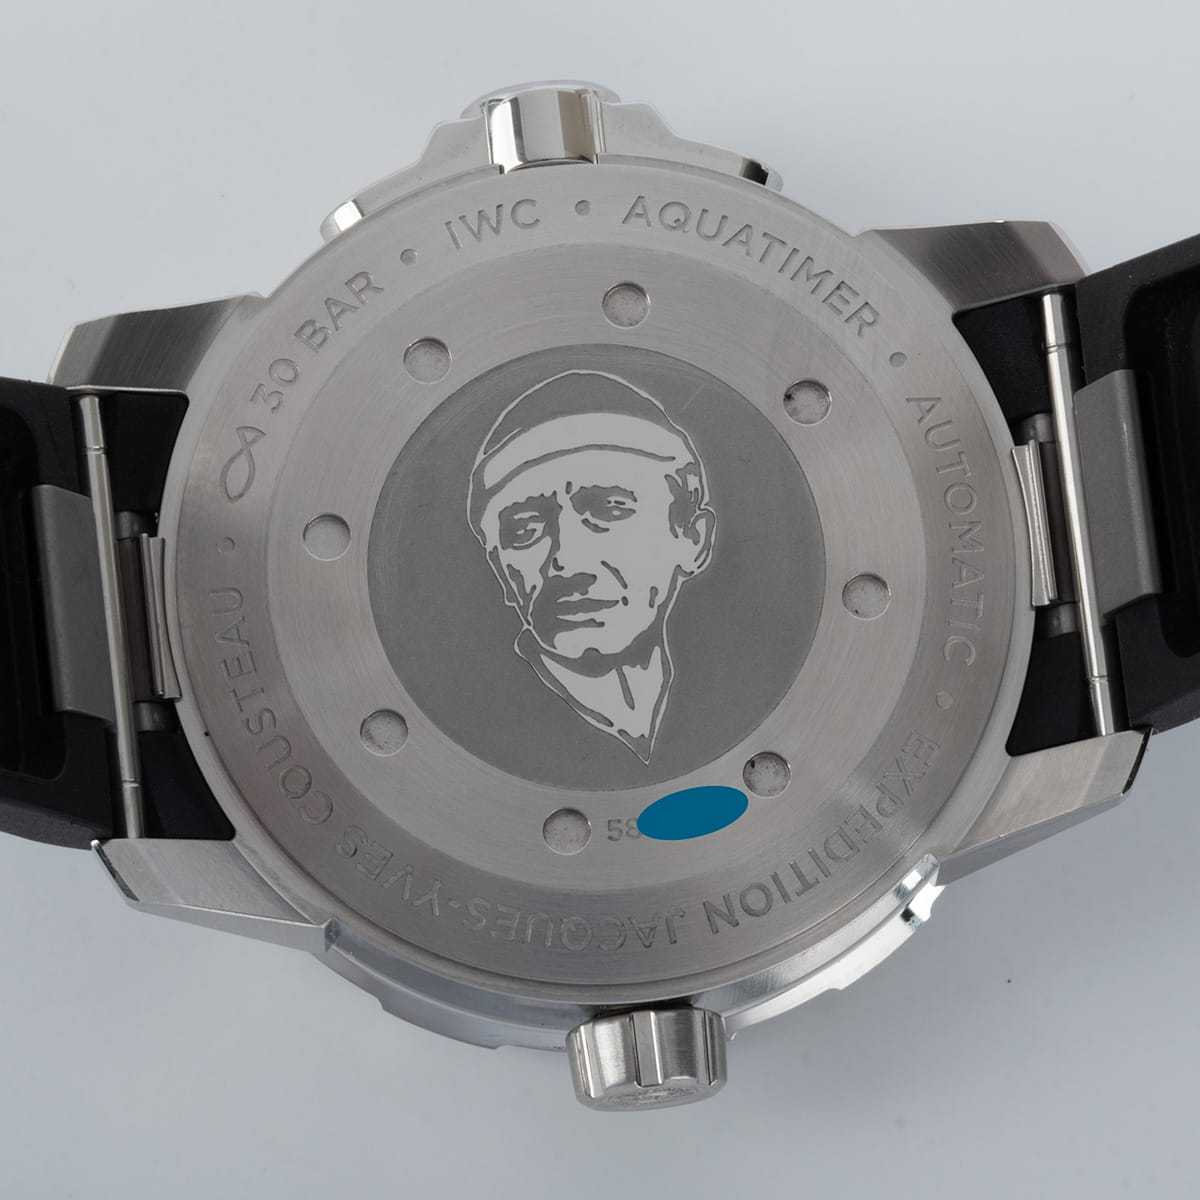 Caseback of Aquatimer 'Expedition Jacques-Yves Cousteau'